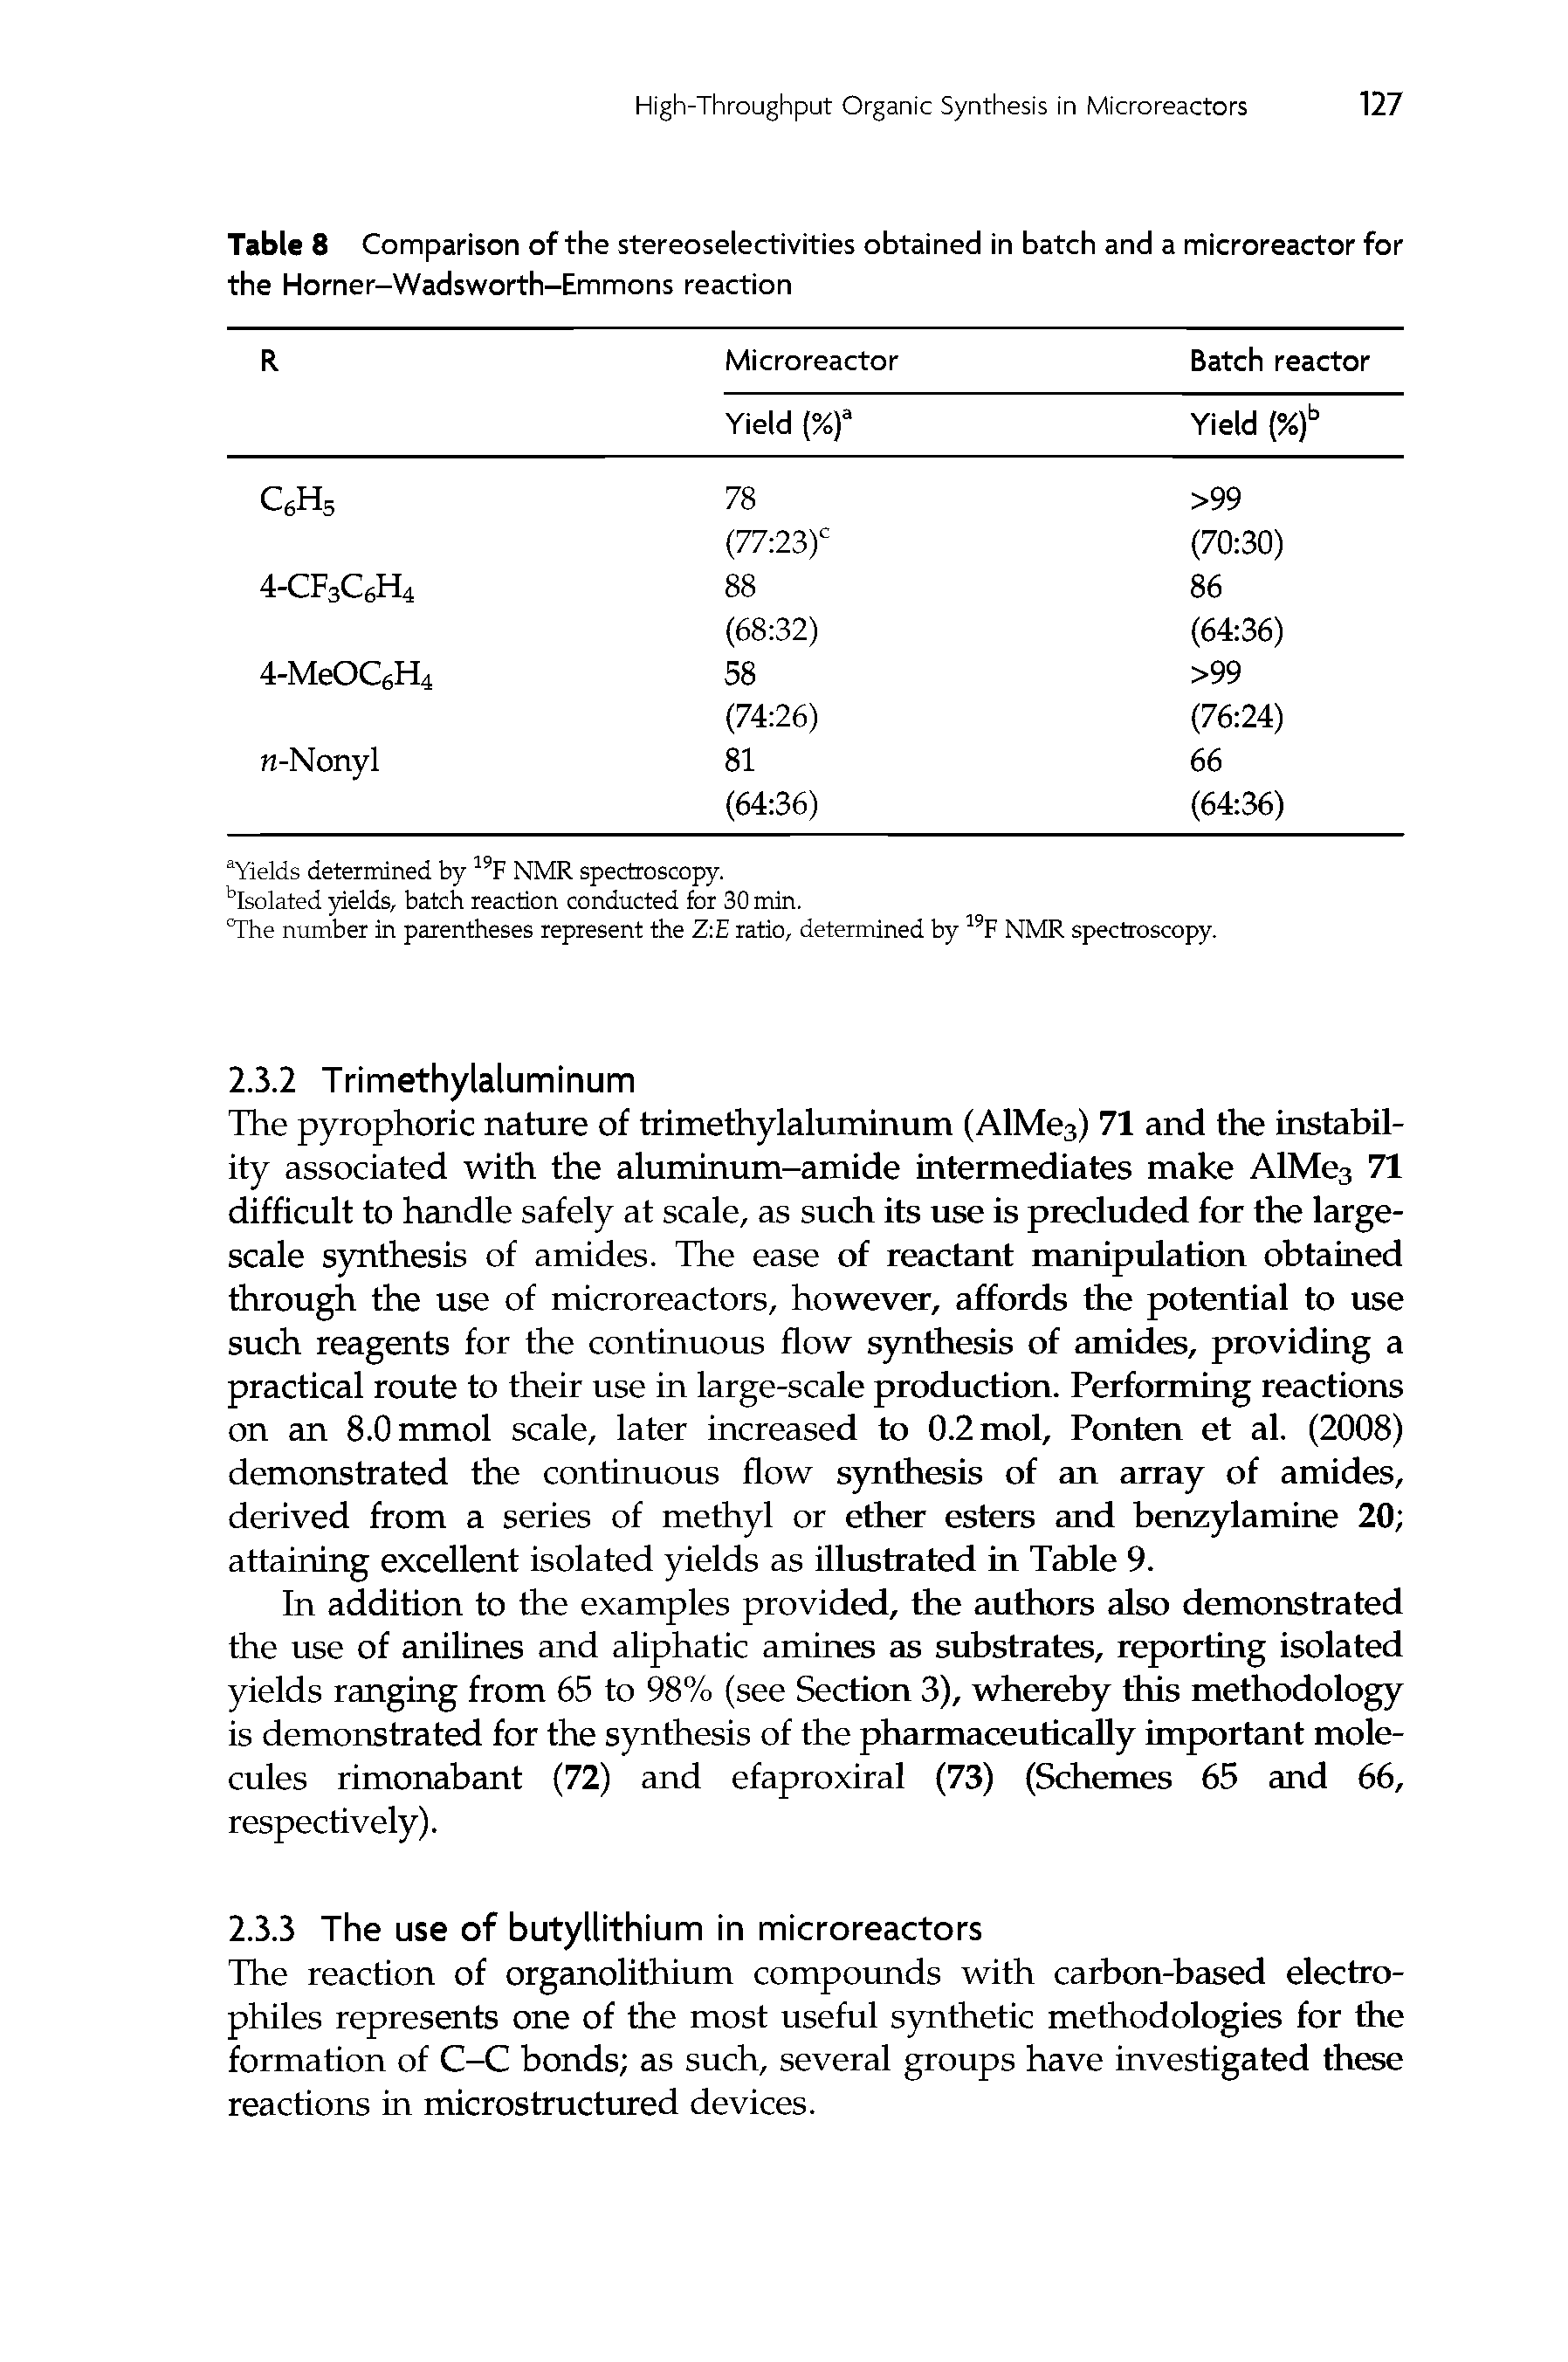 Table 8 Comparison of the stereoselectivities obtained in batch and a microreactor for the Horner-Wadsworth-Emmons reaction...